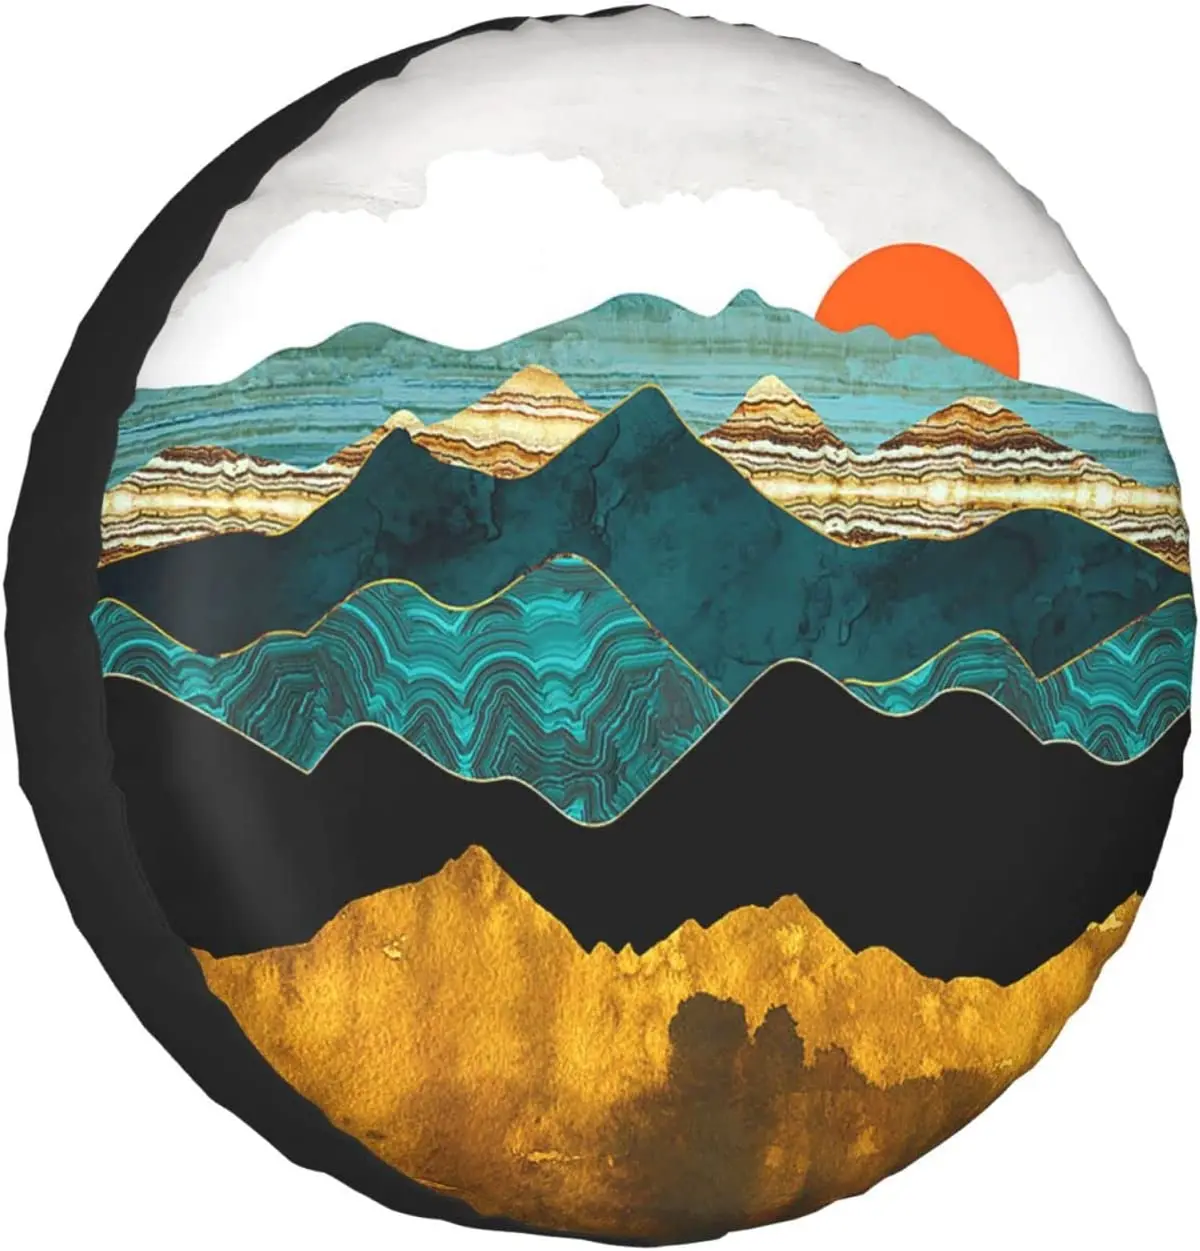 

Mountains Nature Sunset Scenery Spare Tire Cover Universal Fit for Jeep Wrangler Rv SUV Truck Travel Trailer and Many Vehicles 1